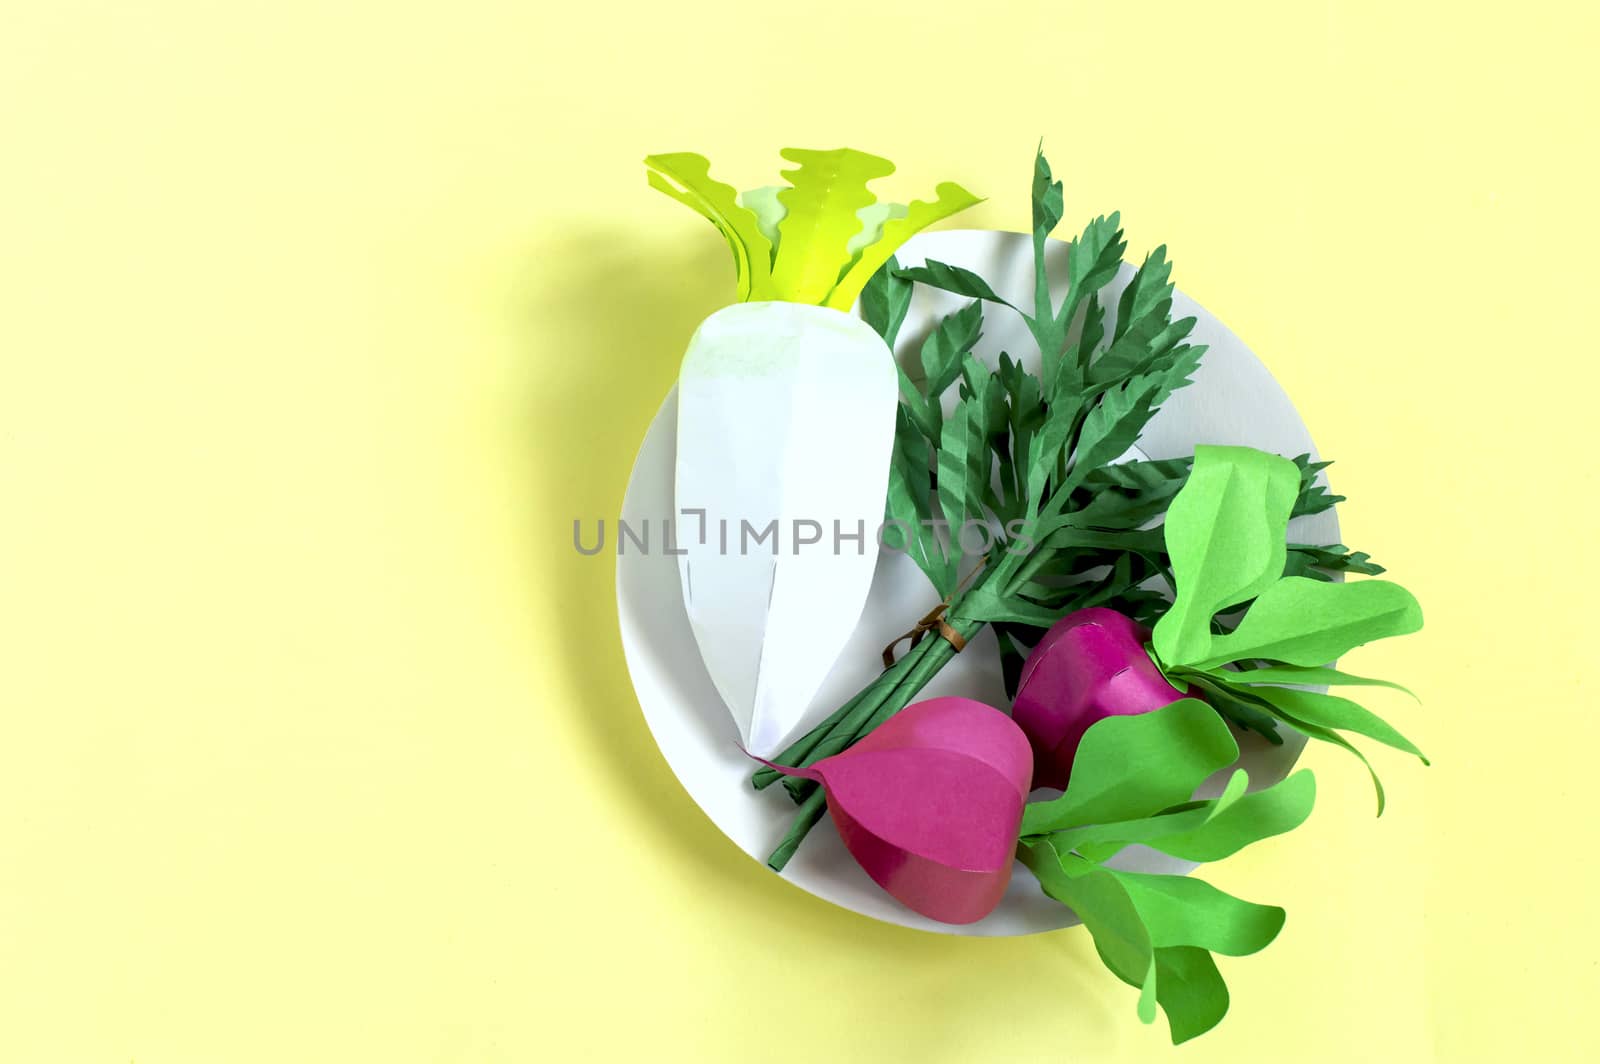 Colorful radish, parsley and daikon made from paper on yellow background. Real volumetric handmade paper objects. Paper art and craft